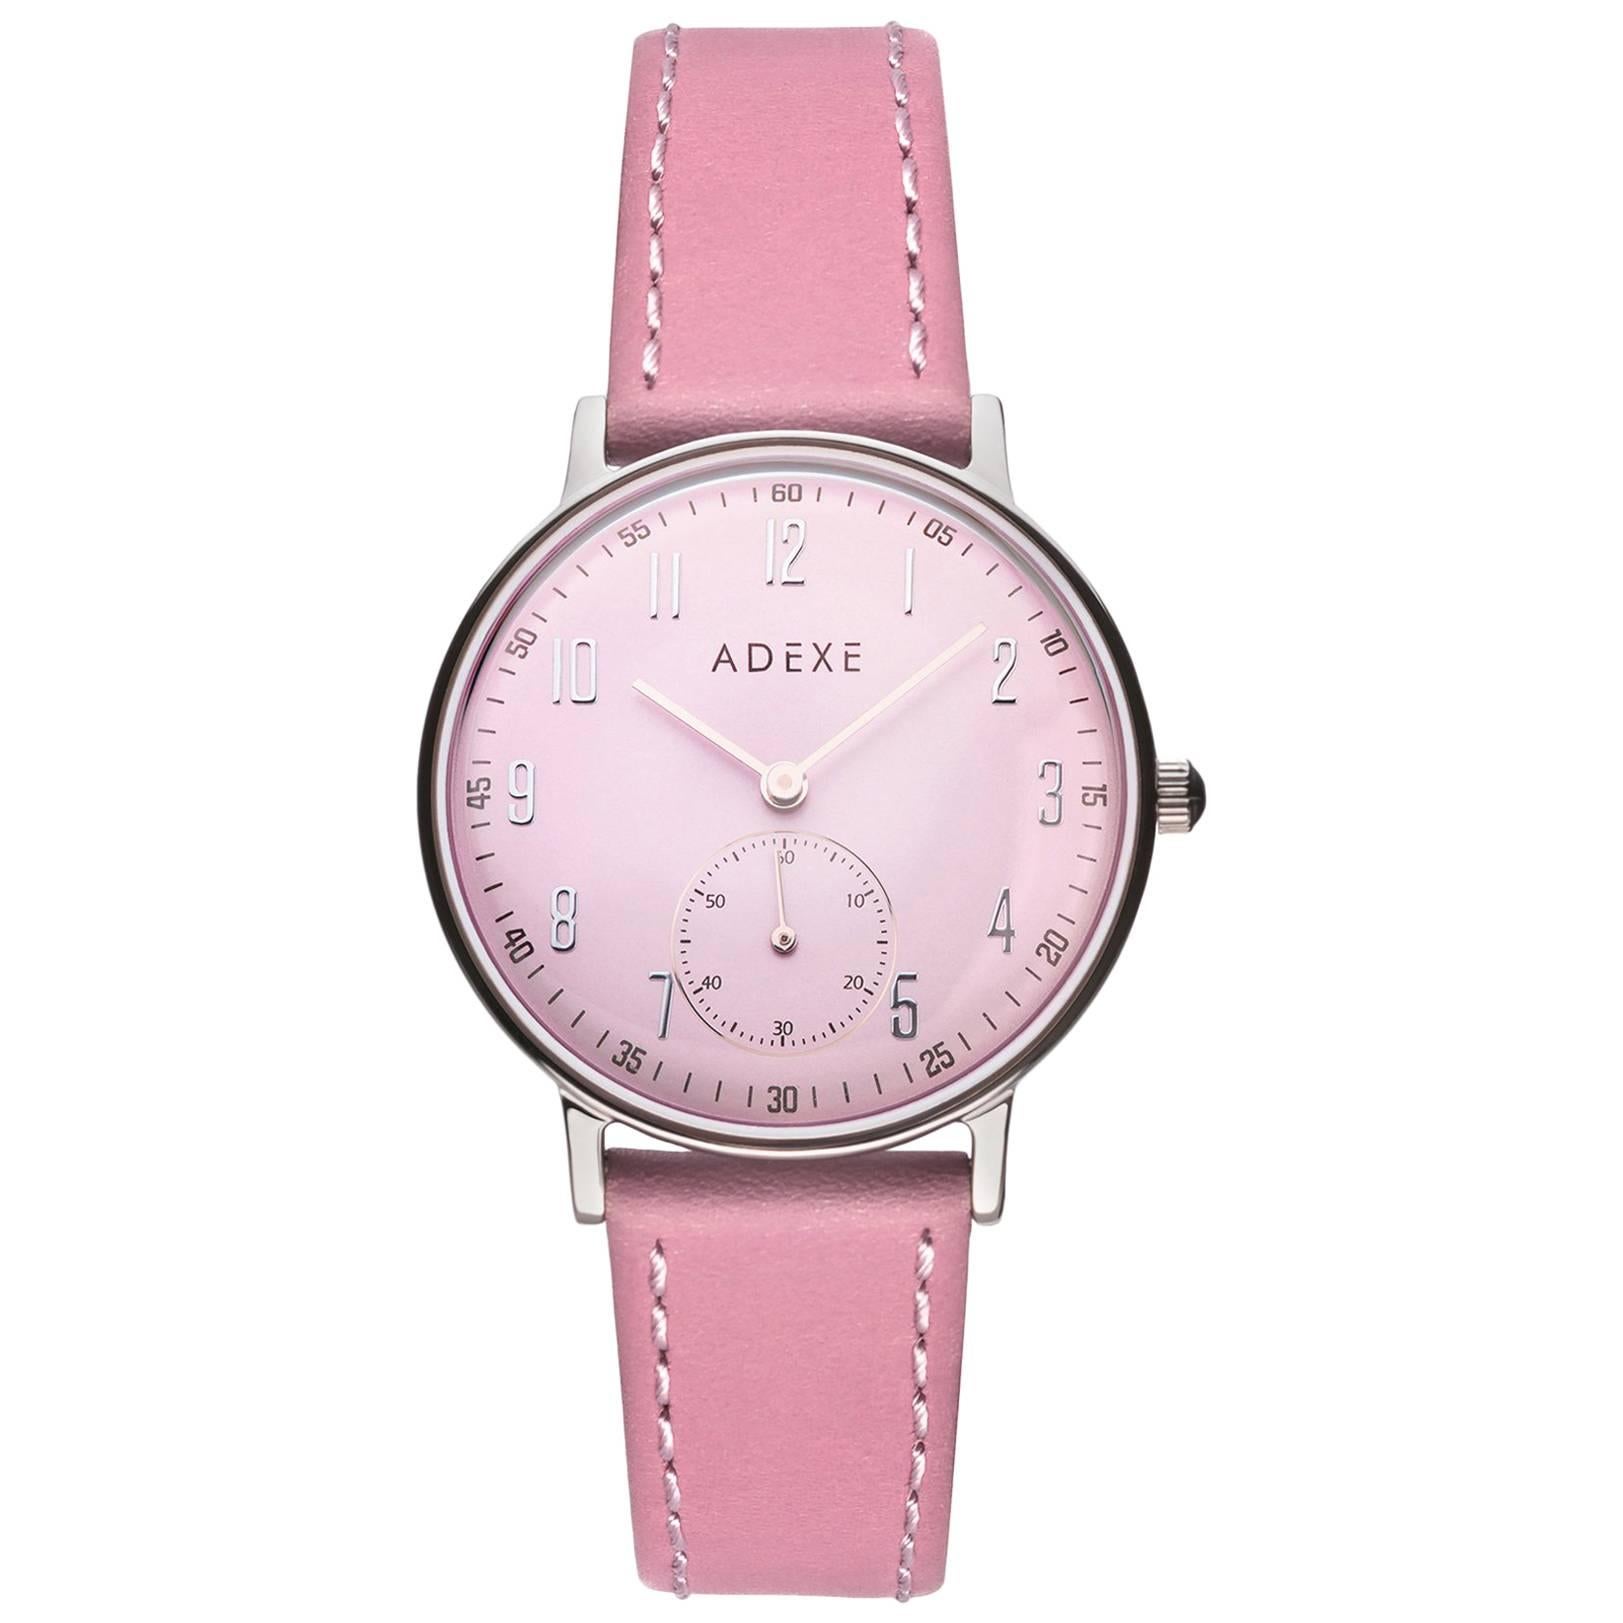 ADEXE Watches Petite Pink Edgy Summer Quartz Watch For Sale